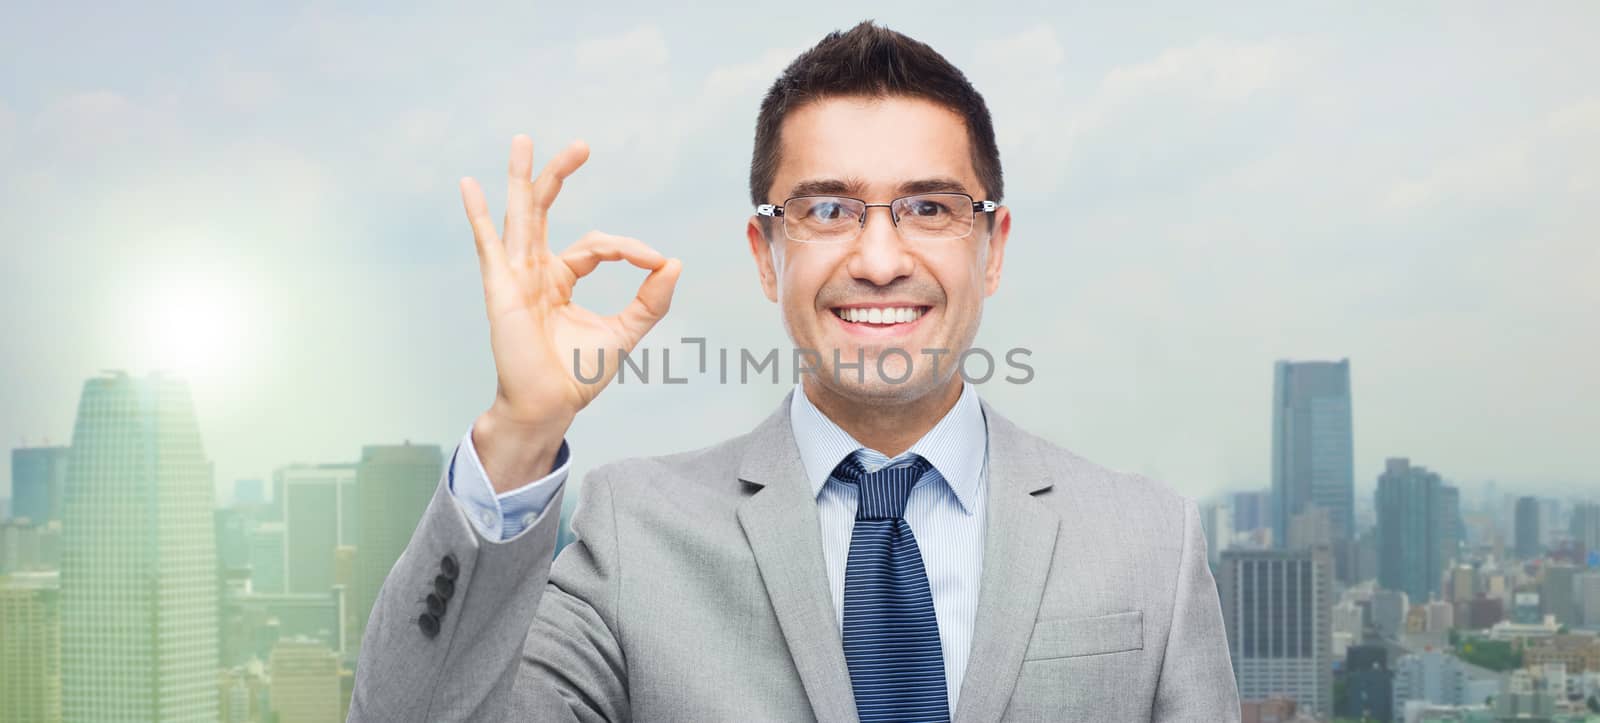 business, people, vision and success concept - happy smiling businessman in eyeglasses and suit showing ok sign over city background